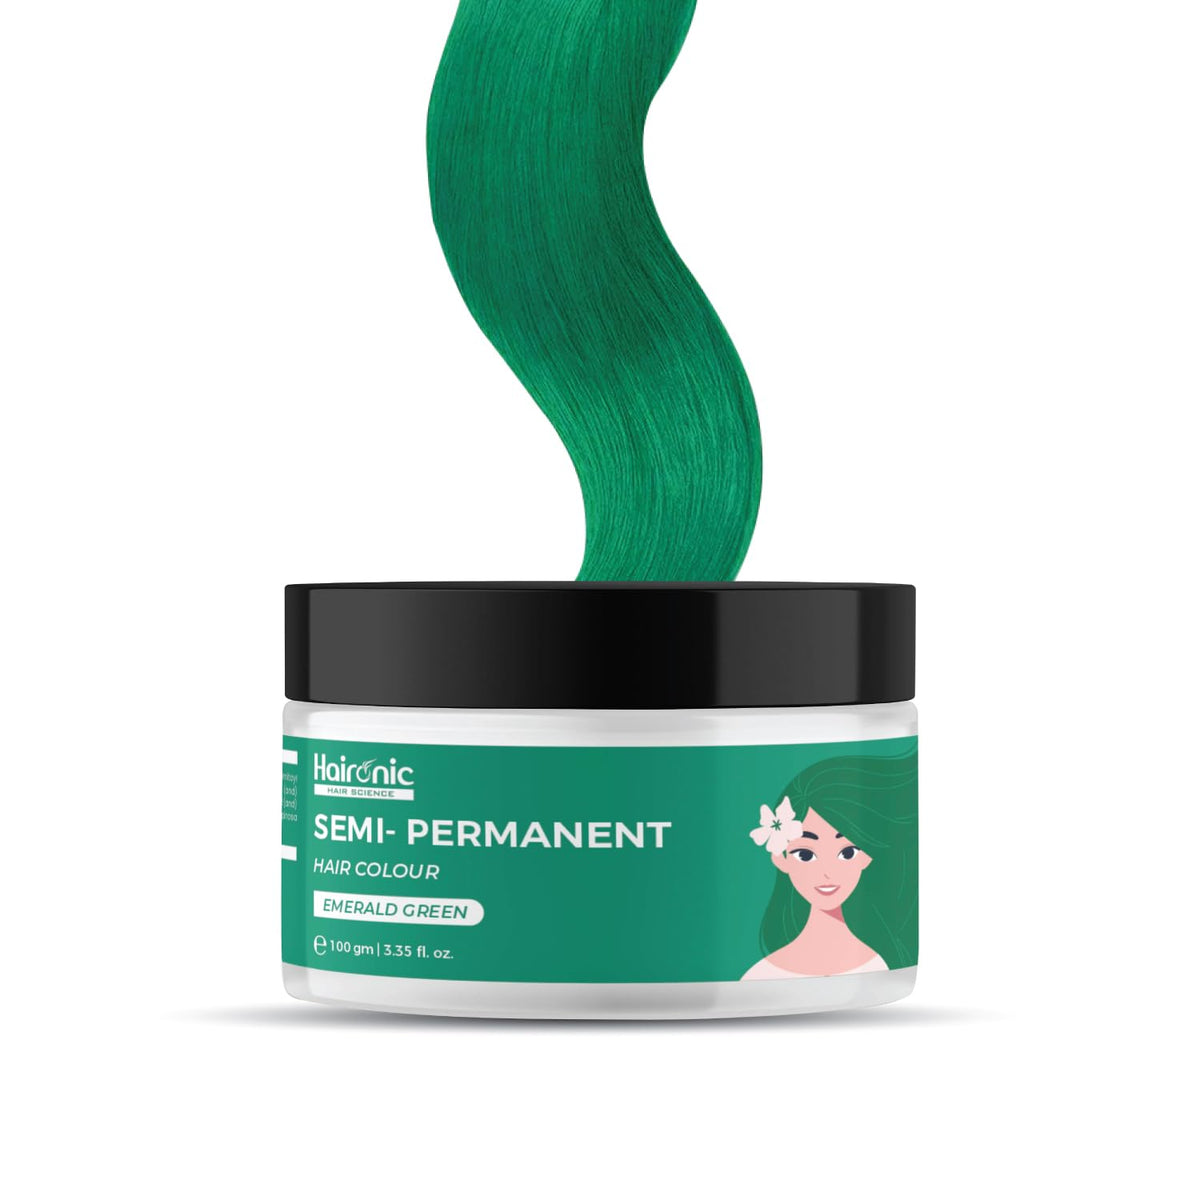 Haironic Emerald Green Semi-Permanent Hair Color|Enriched with Moroccan Argan oil, Silk Protein and Keratin Protein | Temporary Grey Hair Color| Easy Home Application, Perfect for Women & Men – 100gm